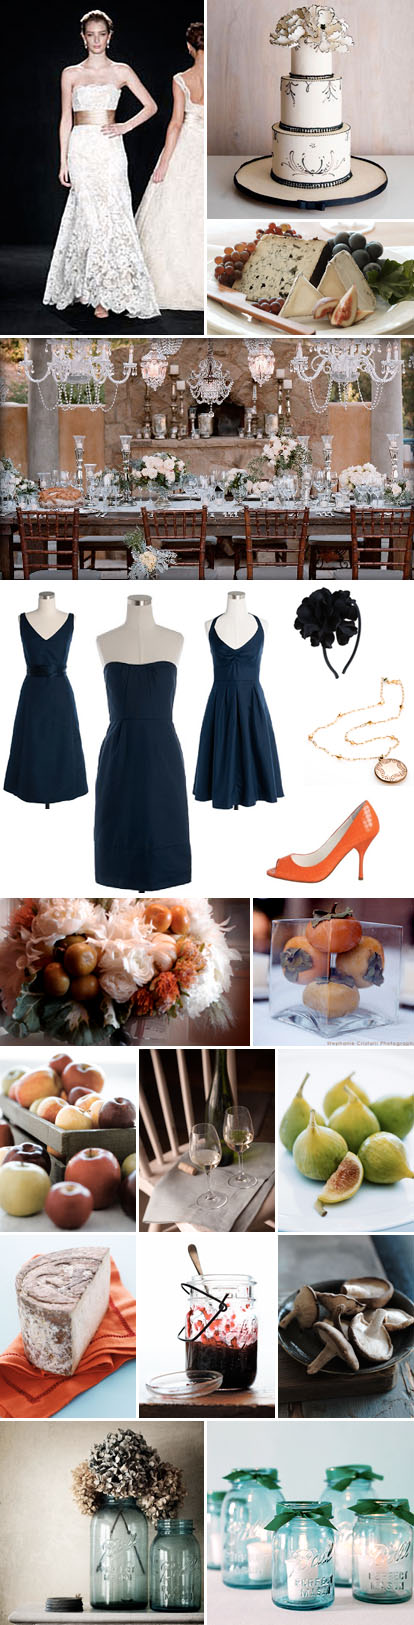 Navy and cream wedding color palette, rustic and elegant fall wedding inspiration board